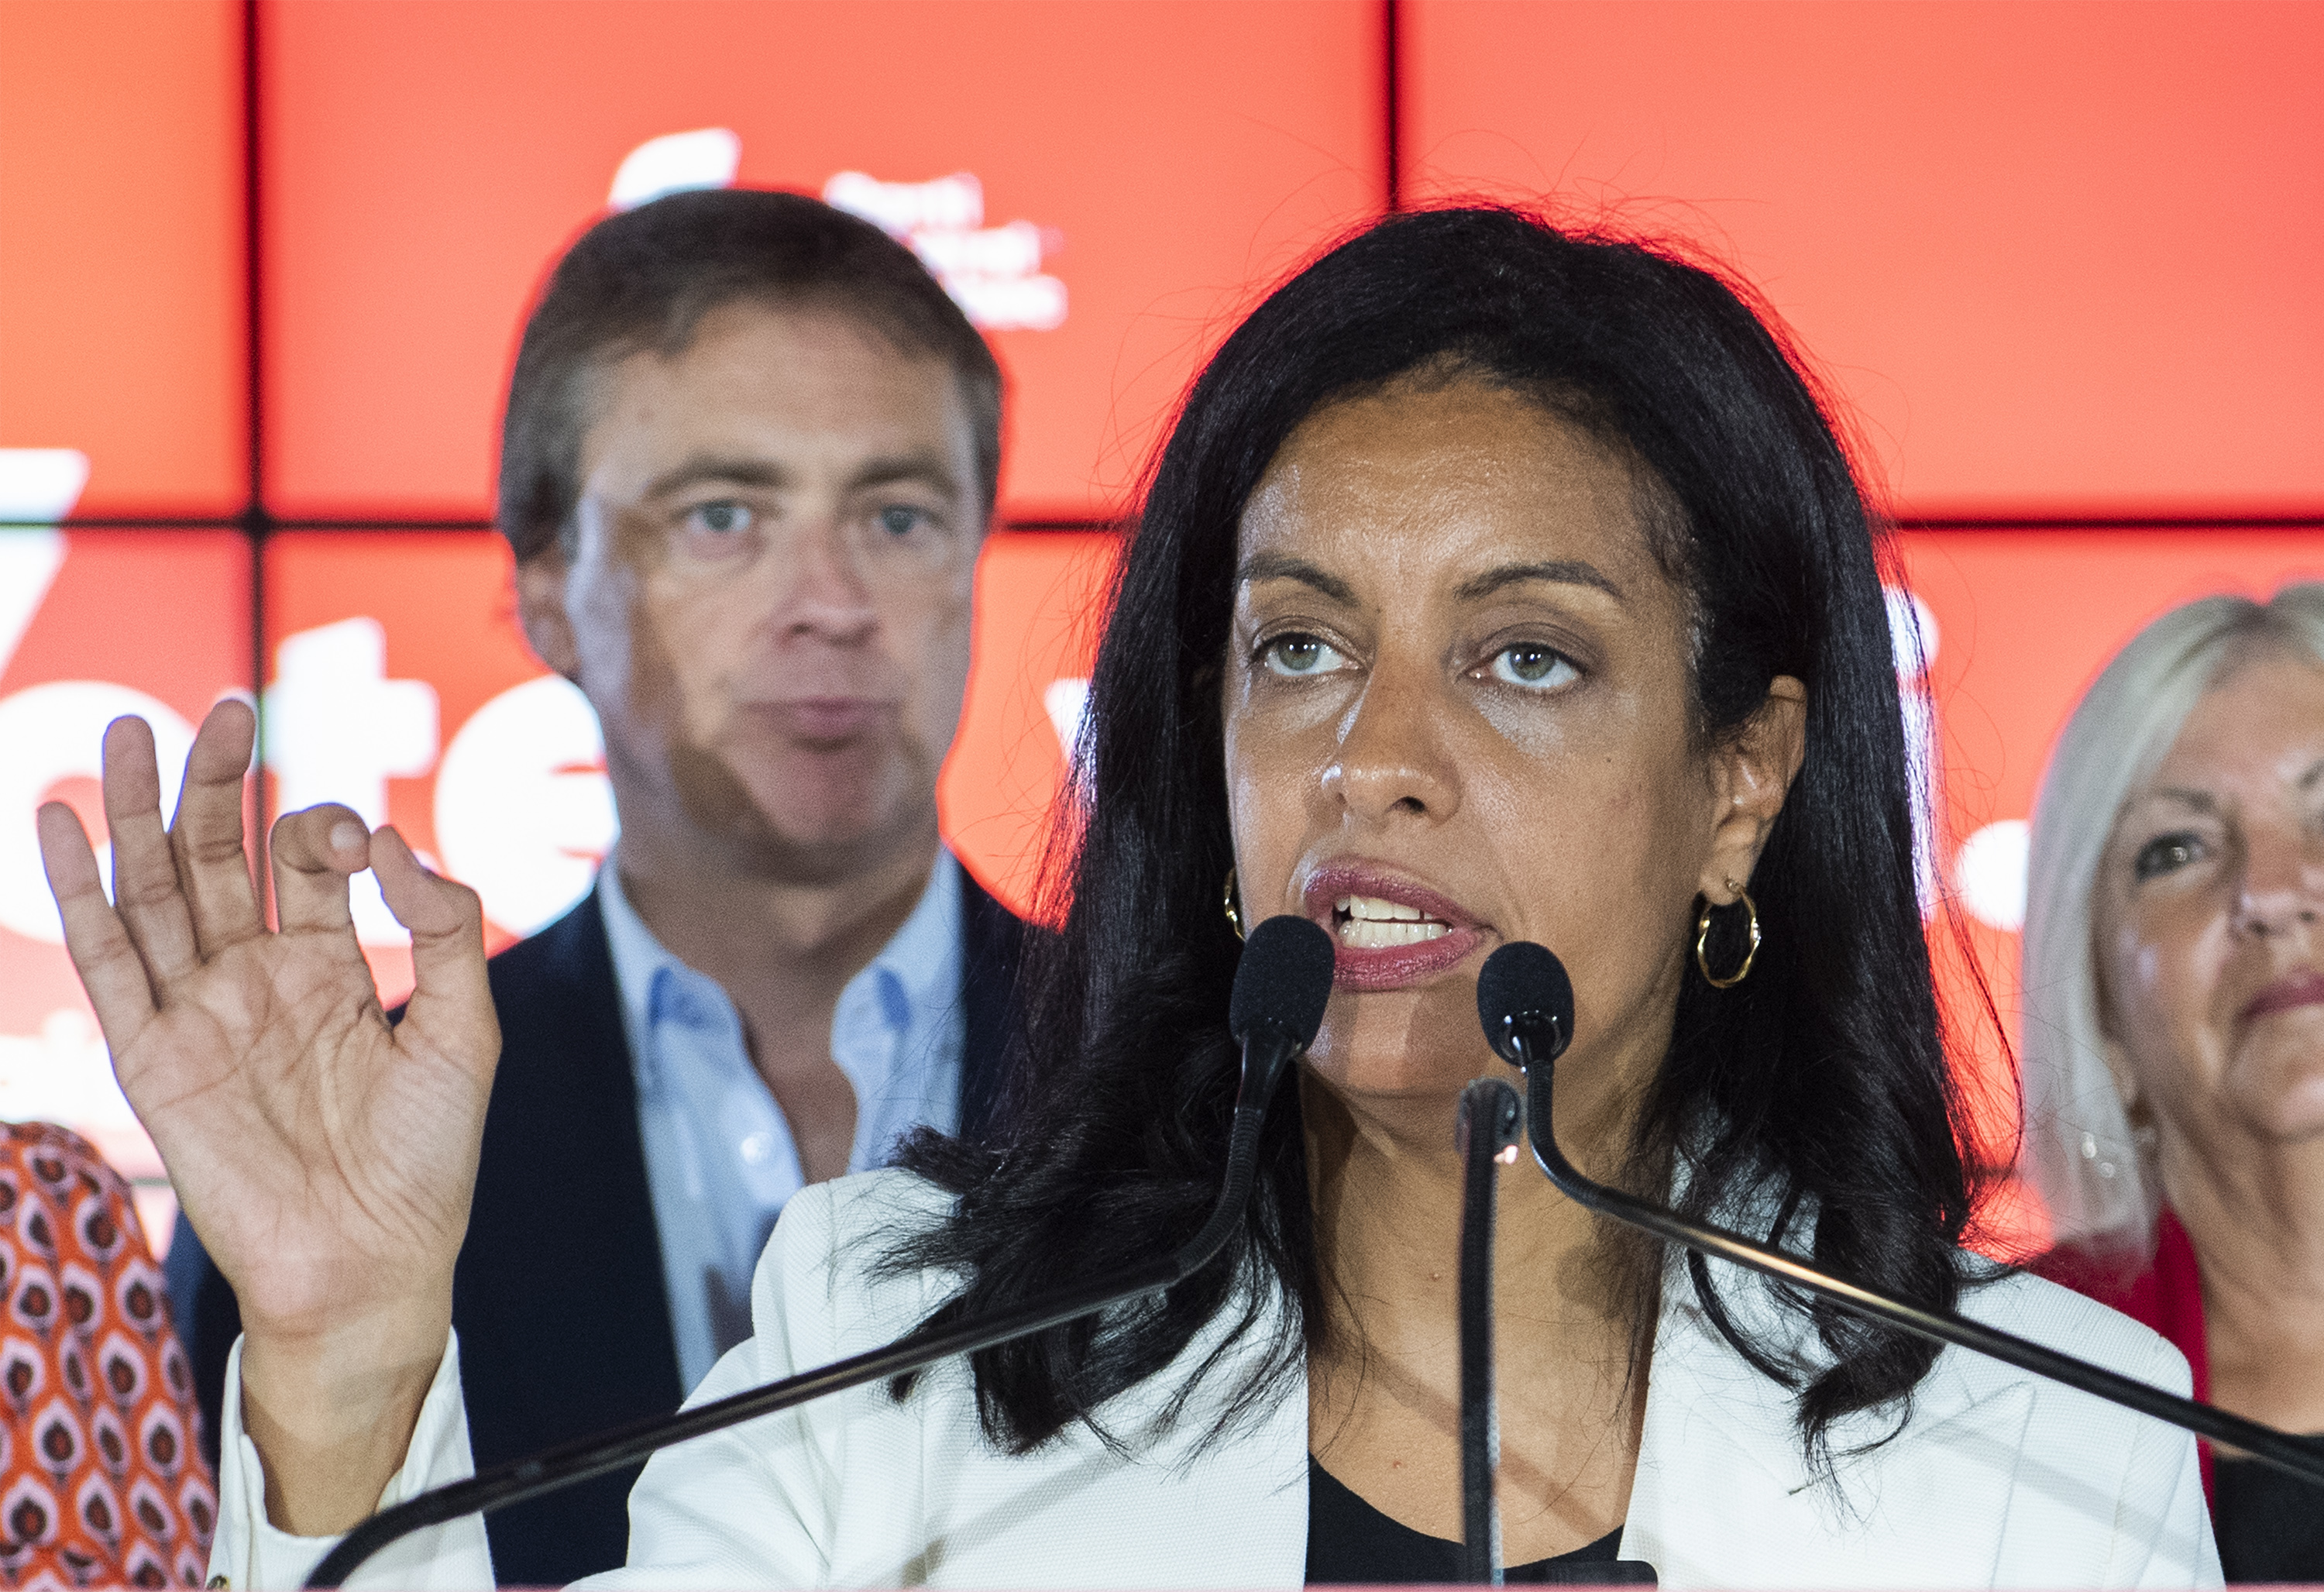 Quebec election: Legault criticized for calling Dominique Anglade
‘that lady’